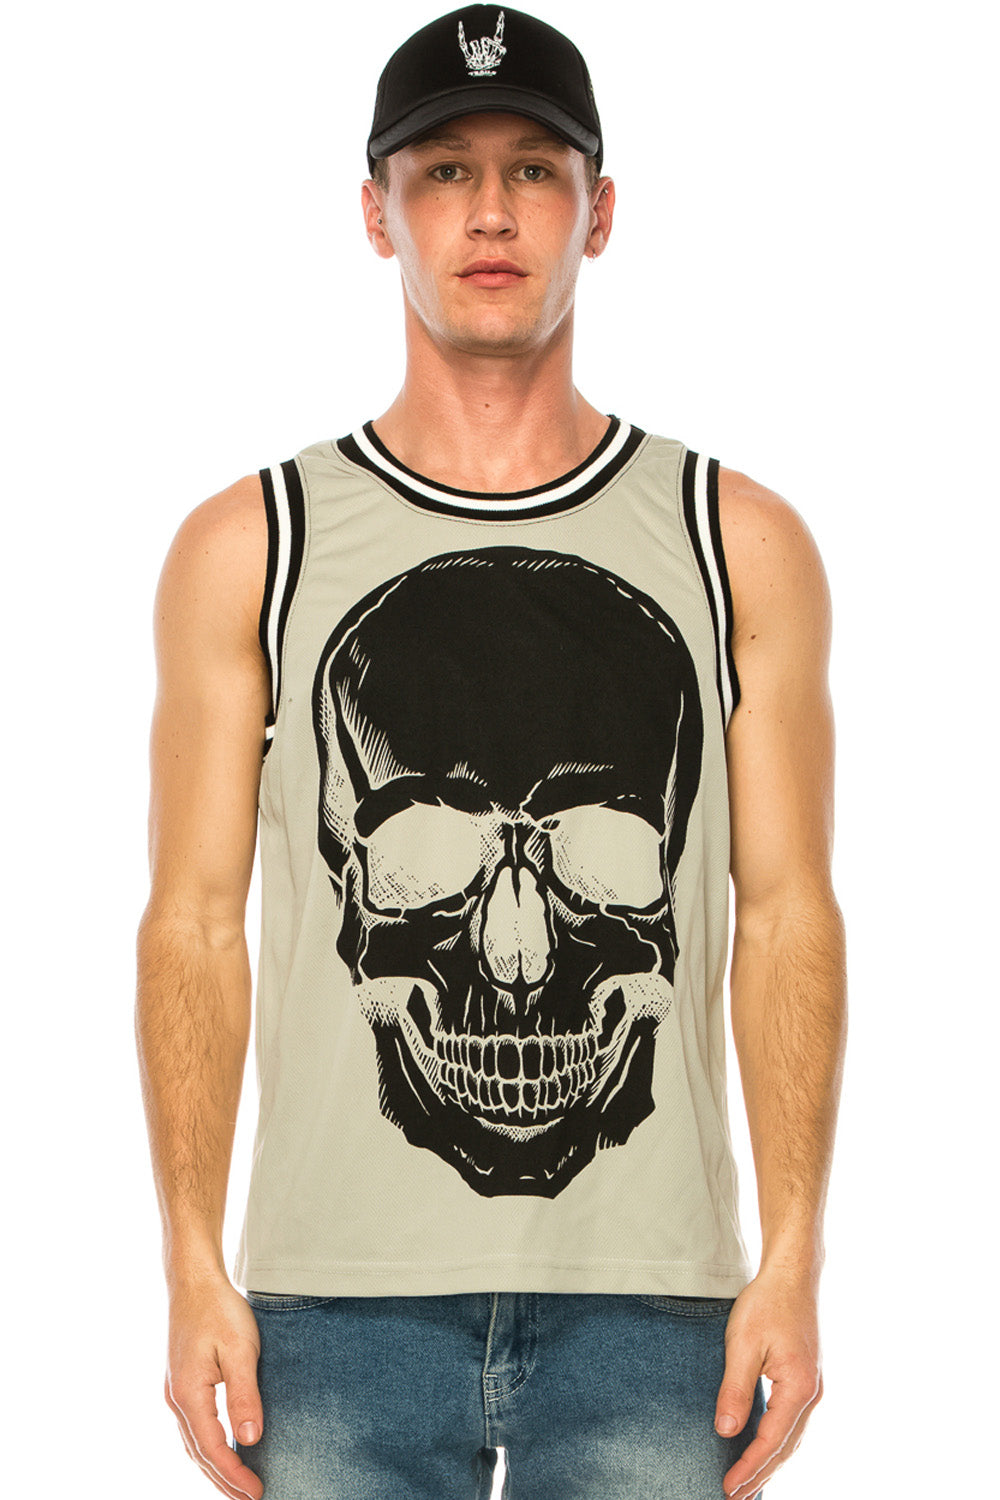 GREY JERSEY WITH BLACK SKULL